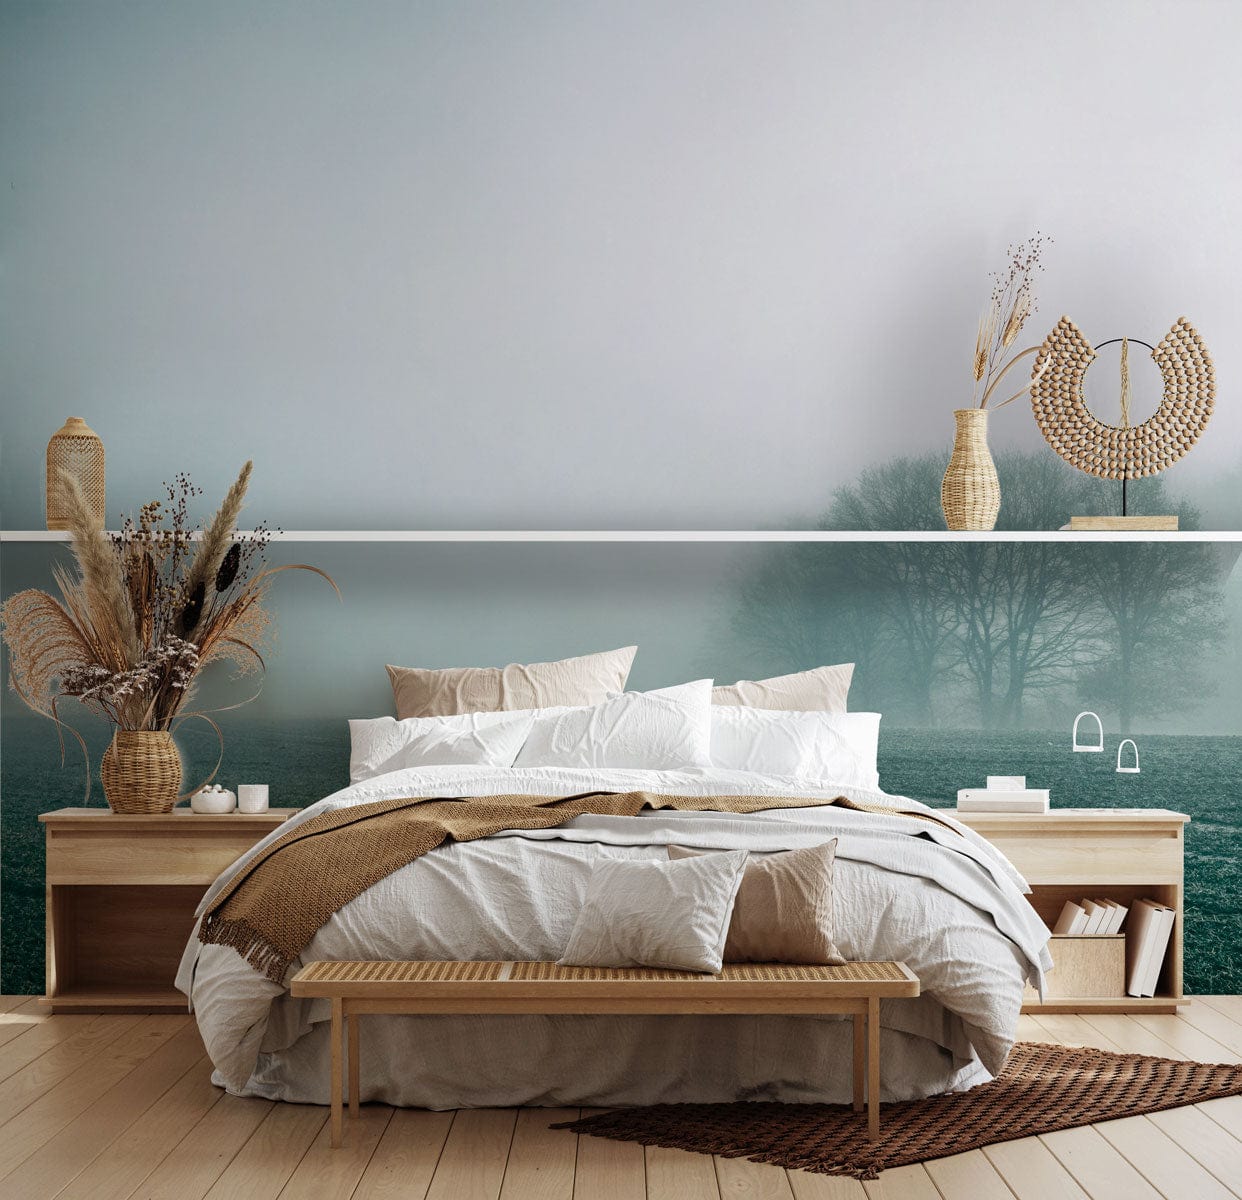 Heavy Fog Field Wallpaper Mural for the Interior Decoration of Bedrooms